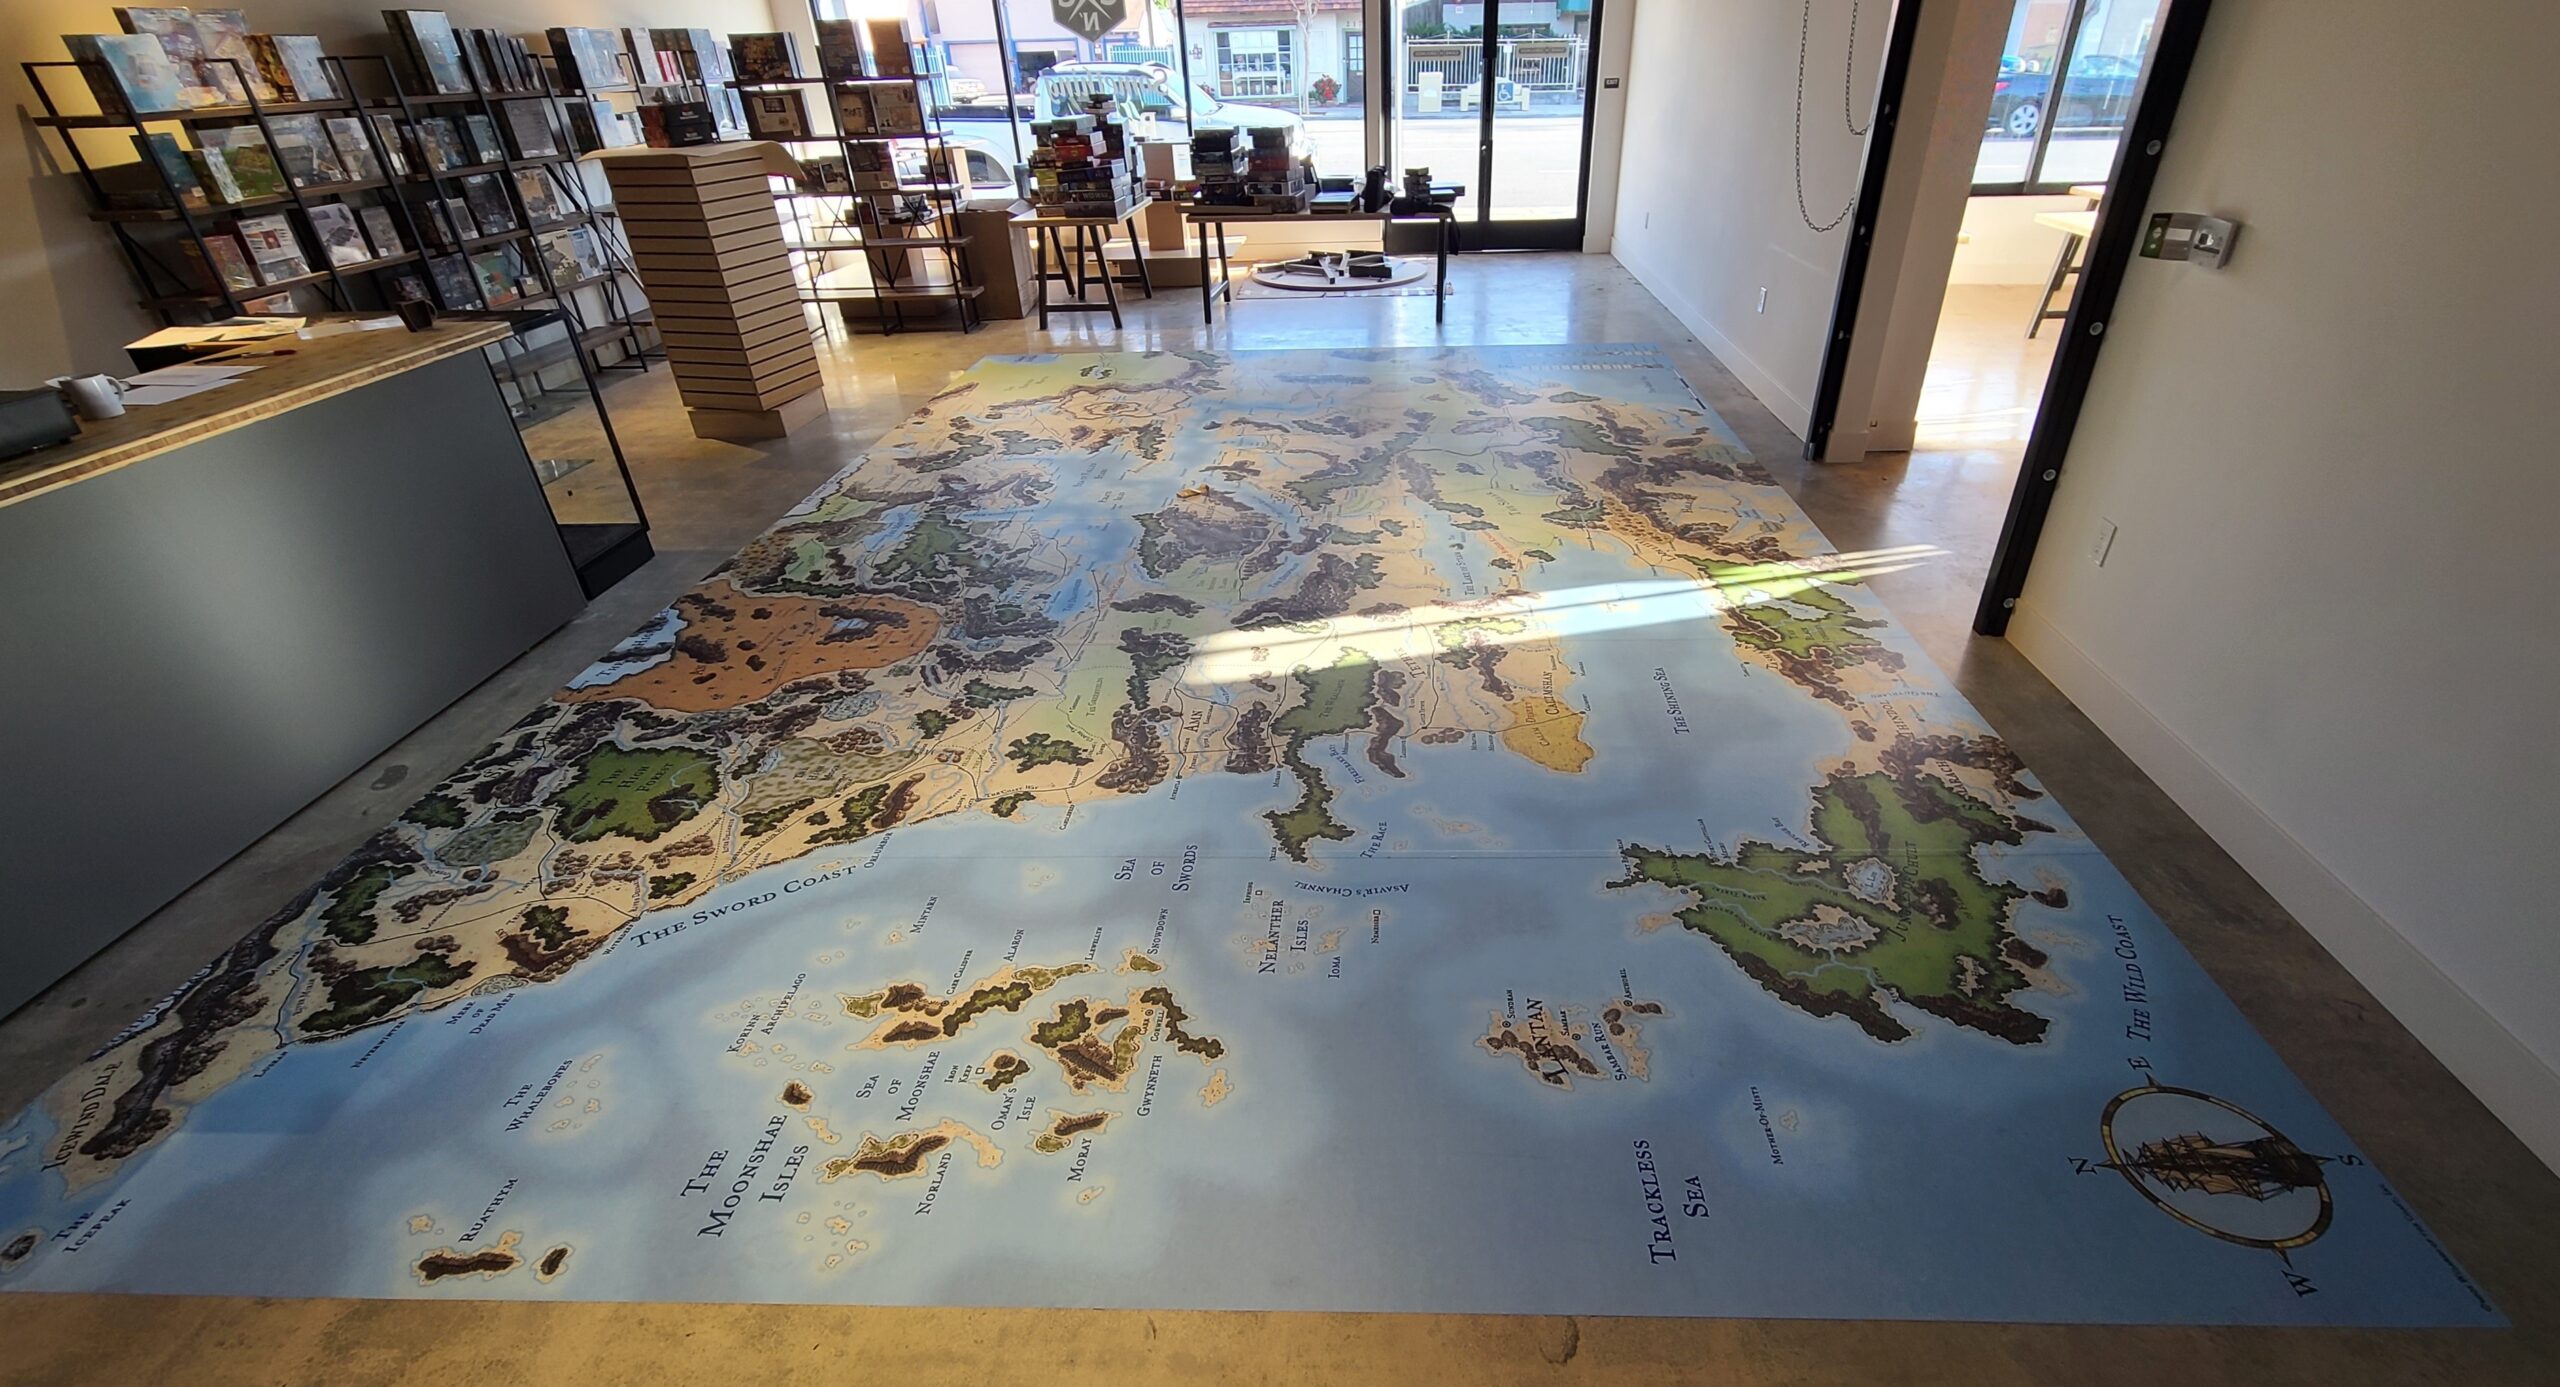 These are the floor graphics we installed for Game N' Grounds in Chatsworth. It depicts a map of Faerun, a fantasy game setting, which is definitely on brand!